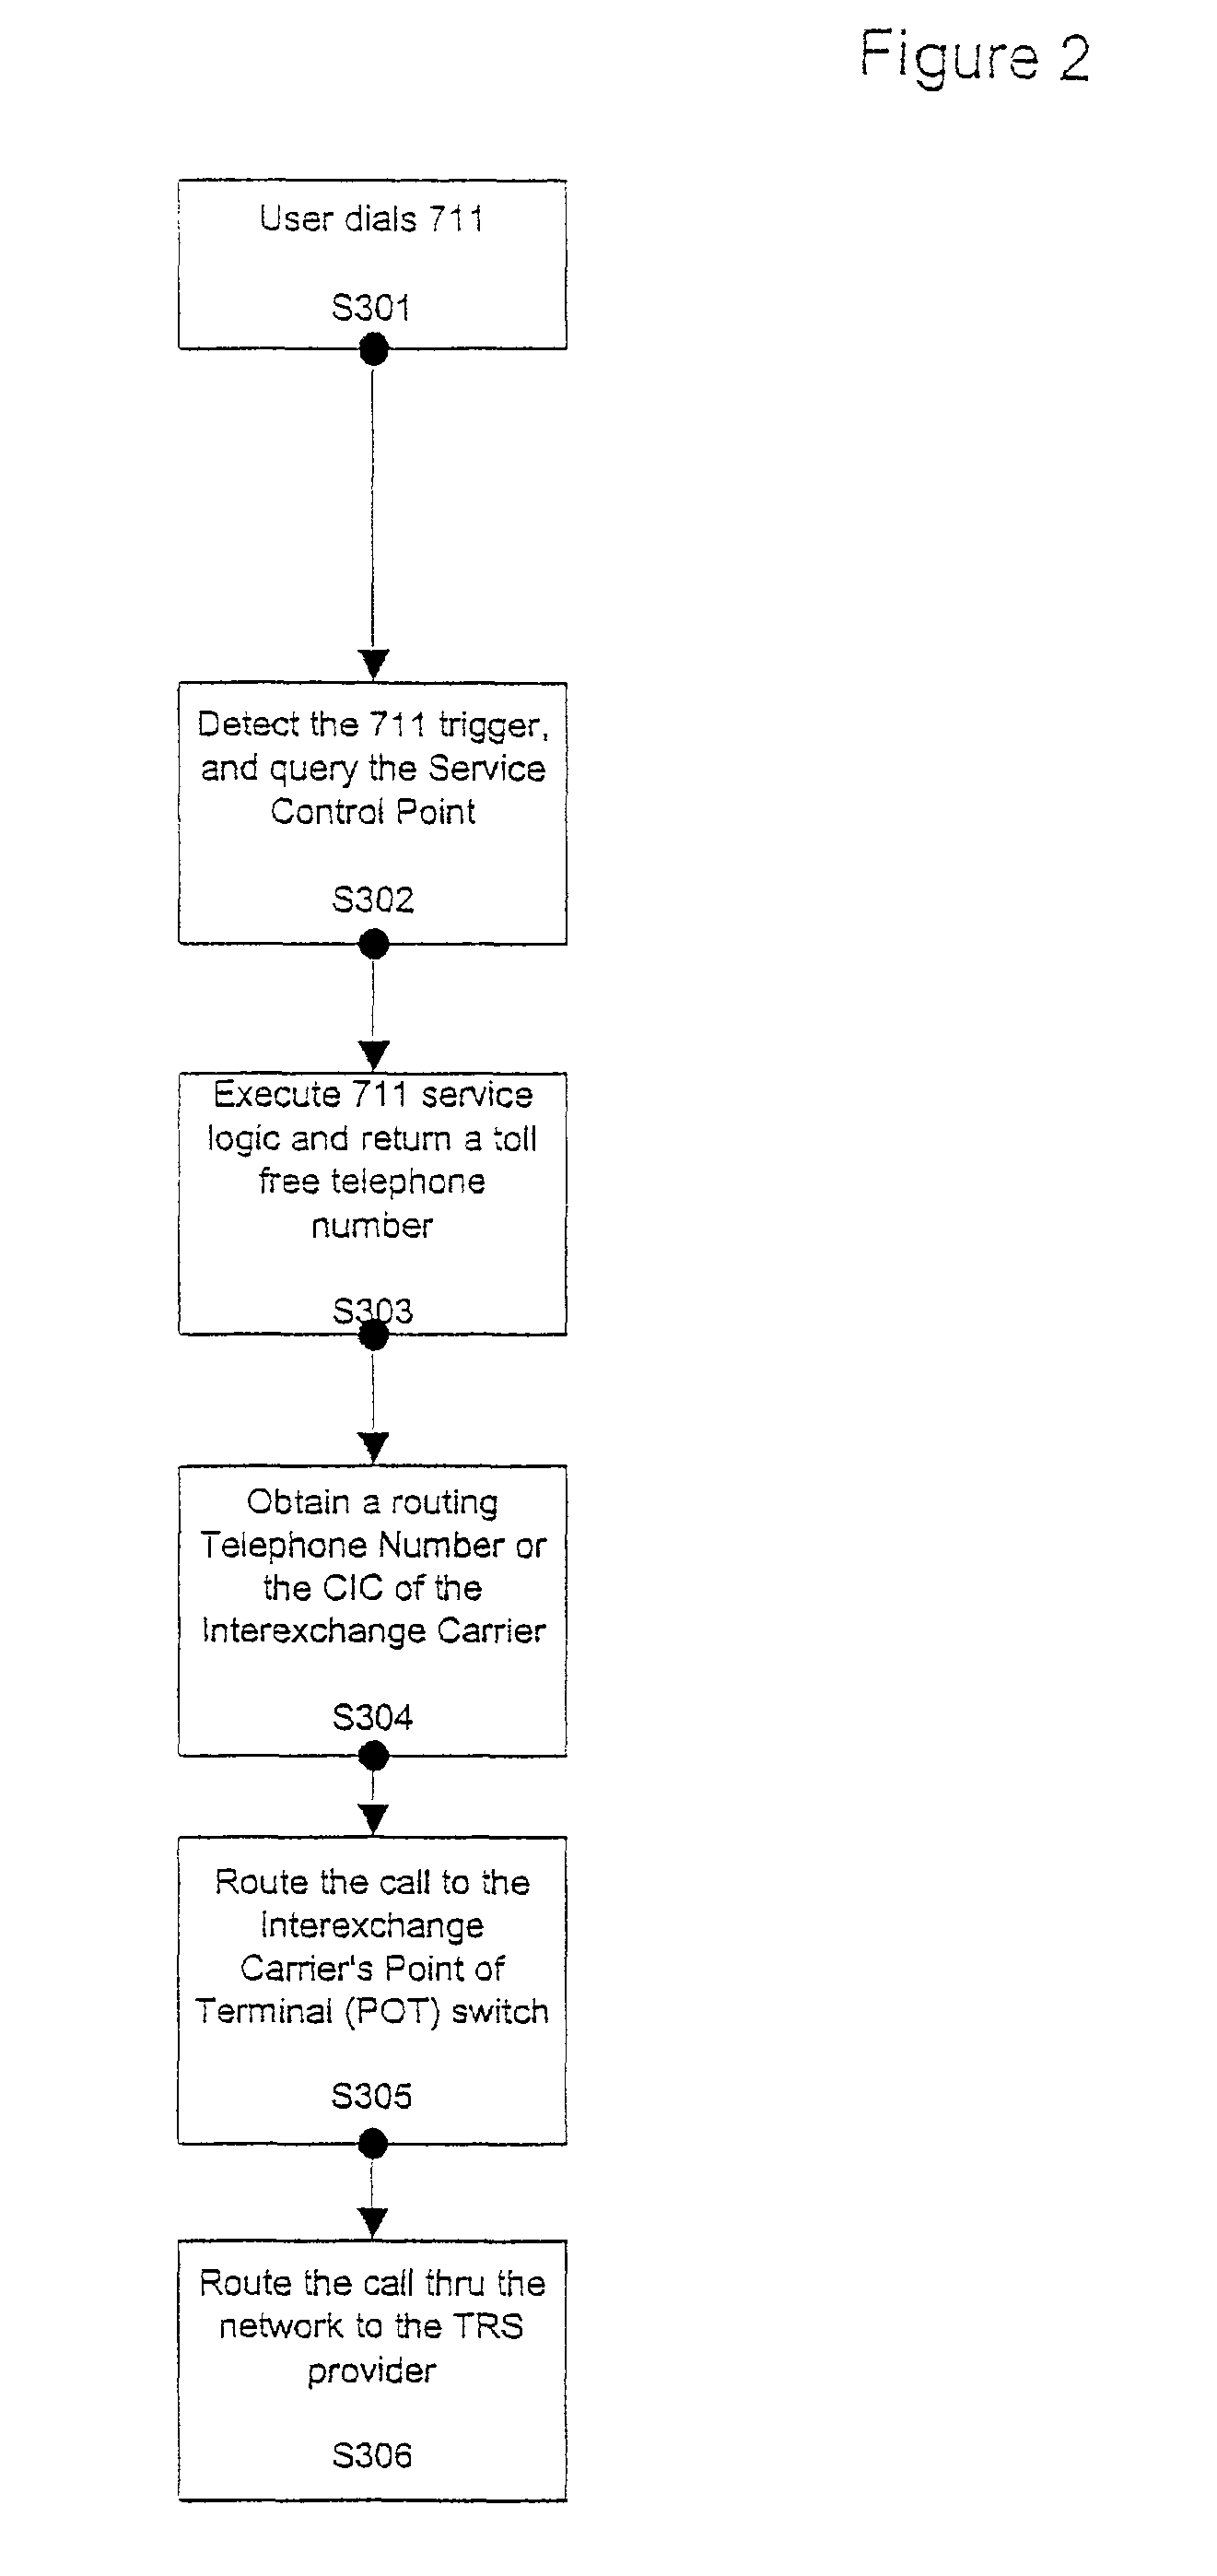 Identification of calling devices dialing a universal number to access a telecommunications relay service center